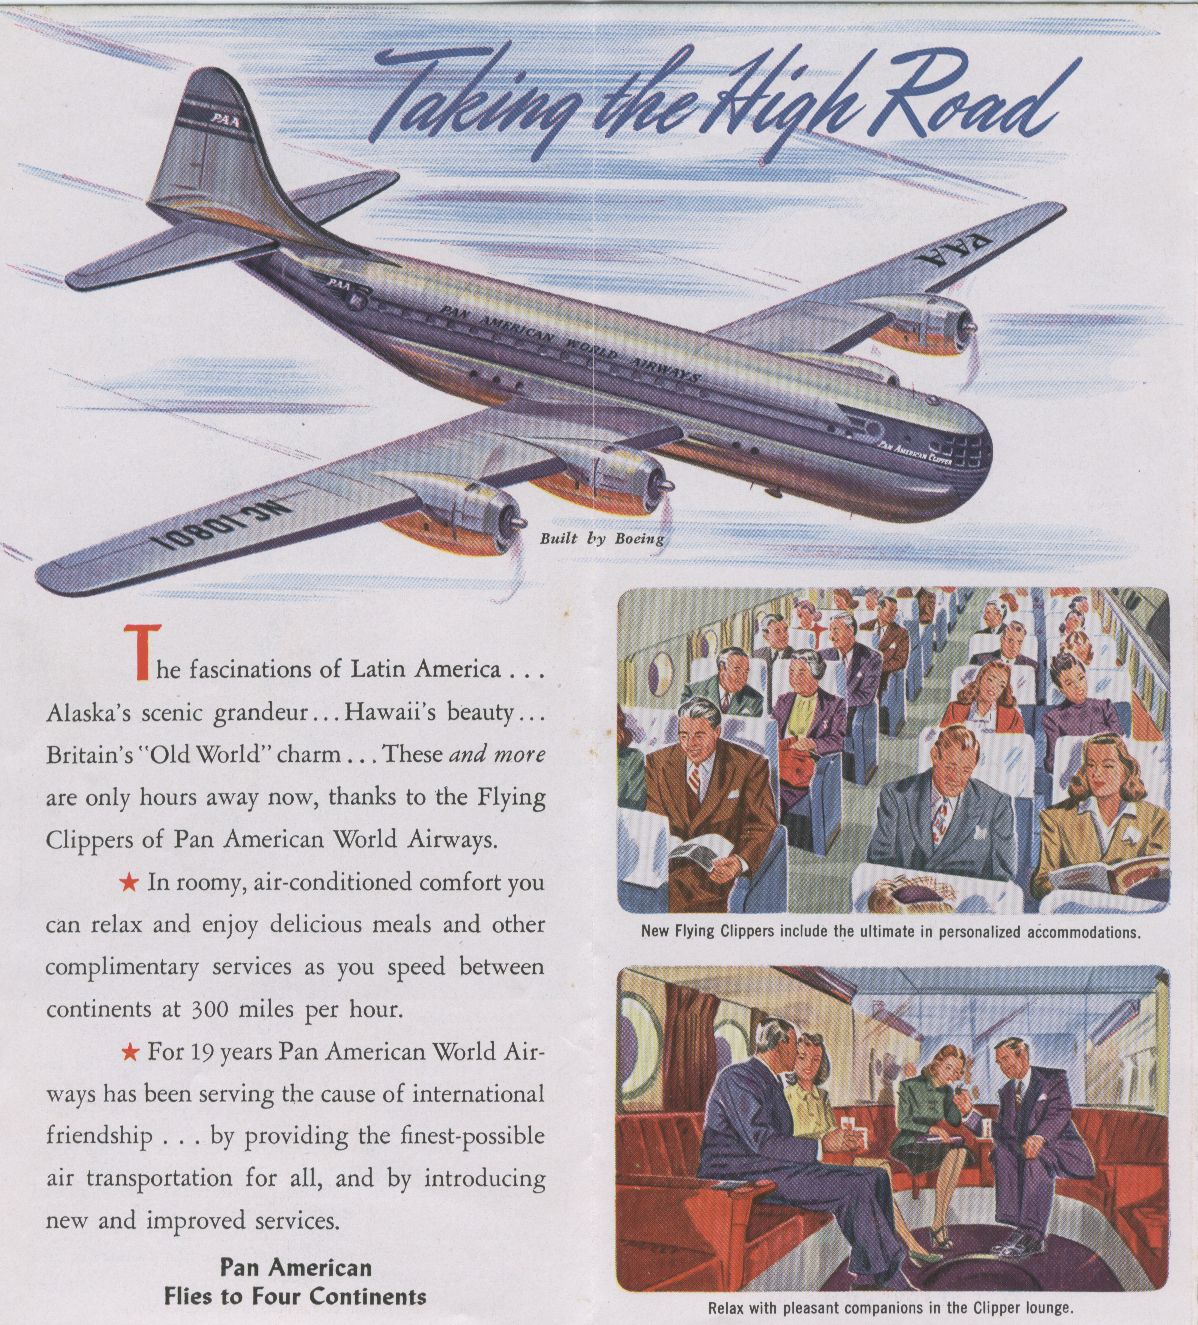 1946  An artist rendition of future B377 Stratocruiser that entered service in 1949.